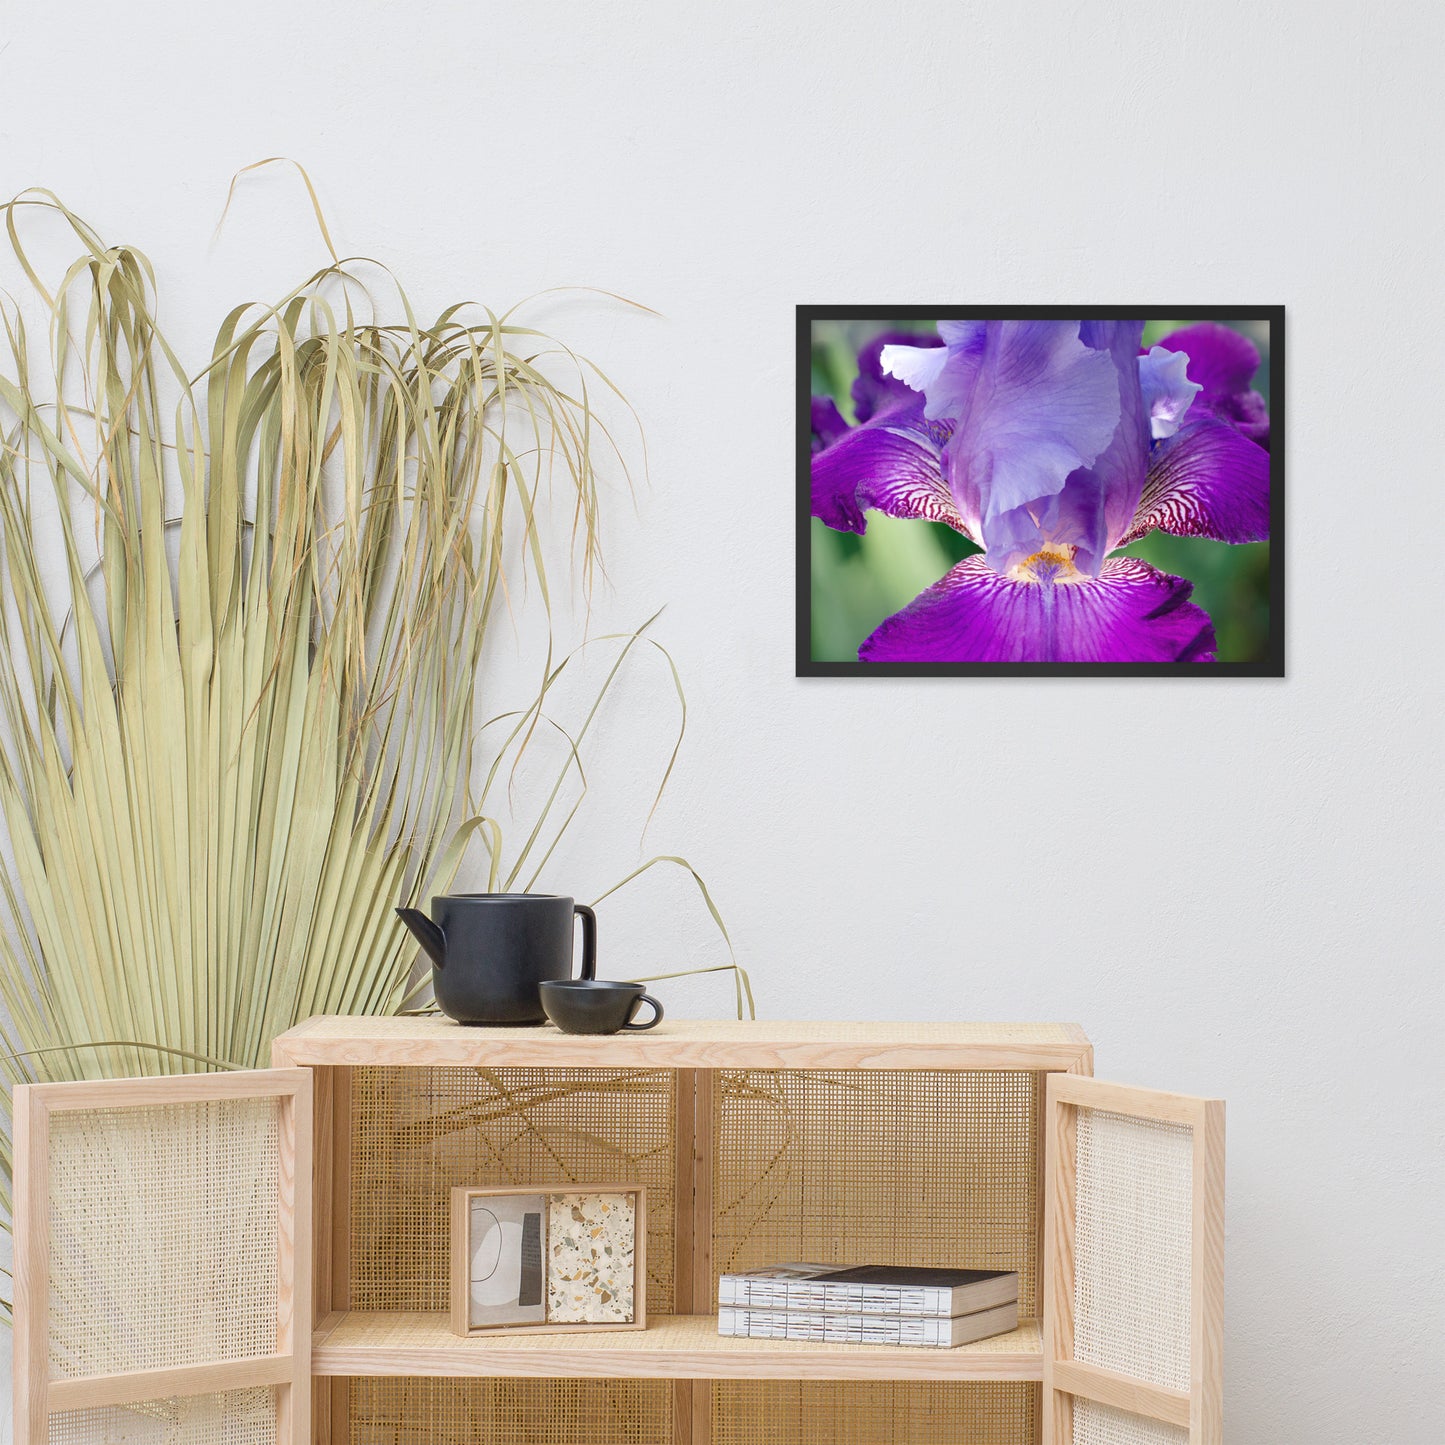 Large Prints For Above Bed: Glowing Iris - Floral / Botanical / Nature Photo Framed Wall Art Print - Artwork - Wall Decor - Modern Home Decor